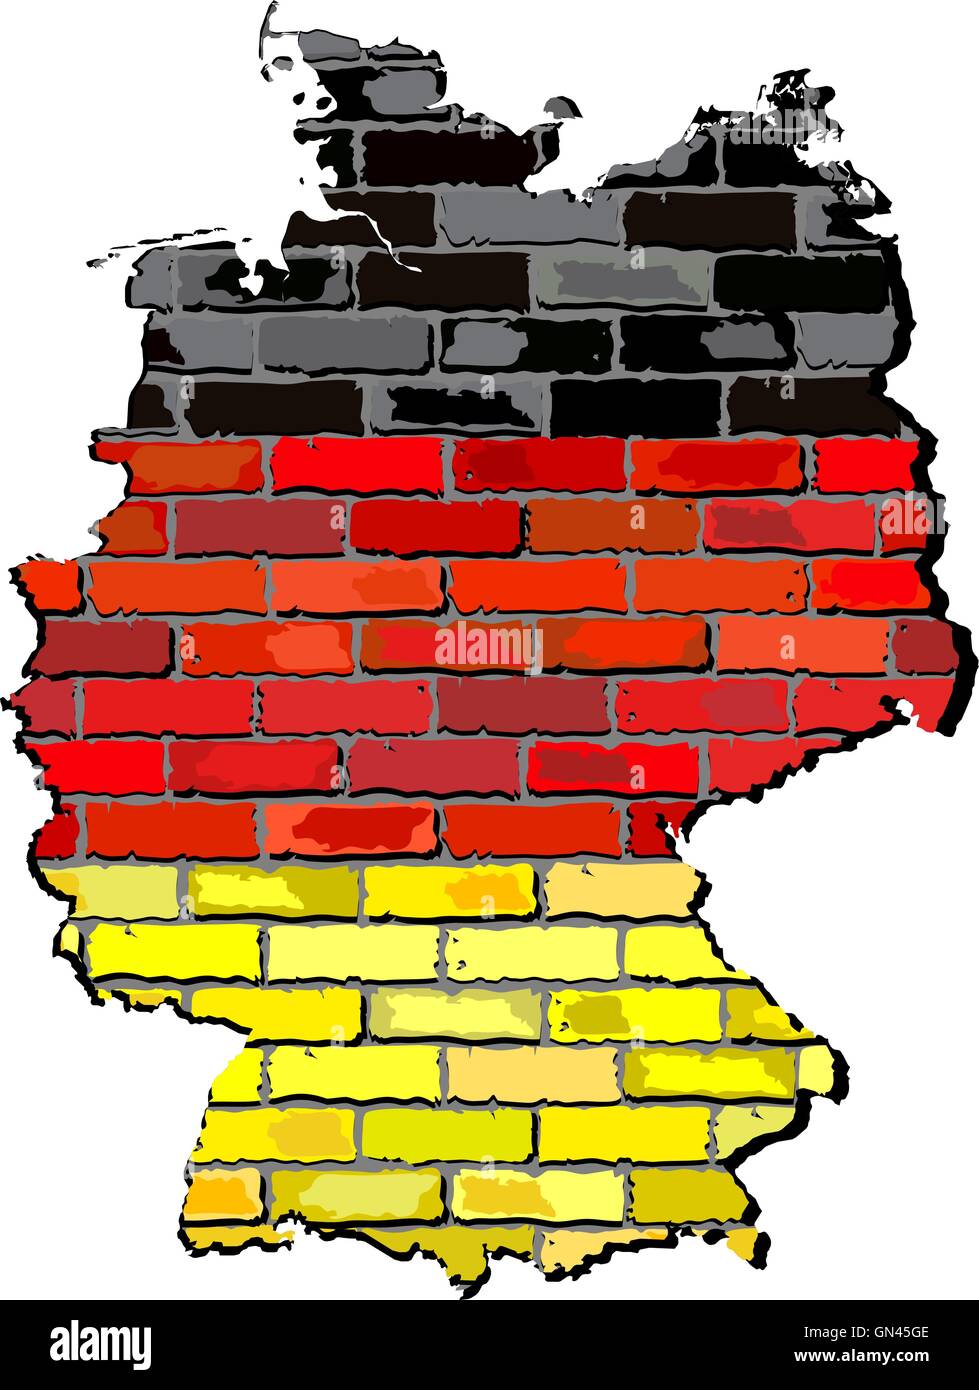 Germany map on a brick wall Stock Vector